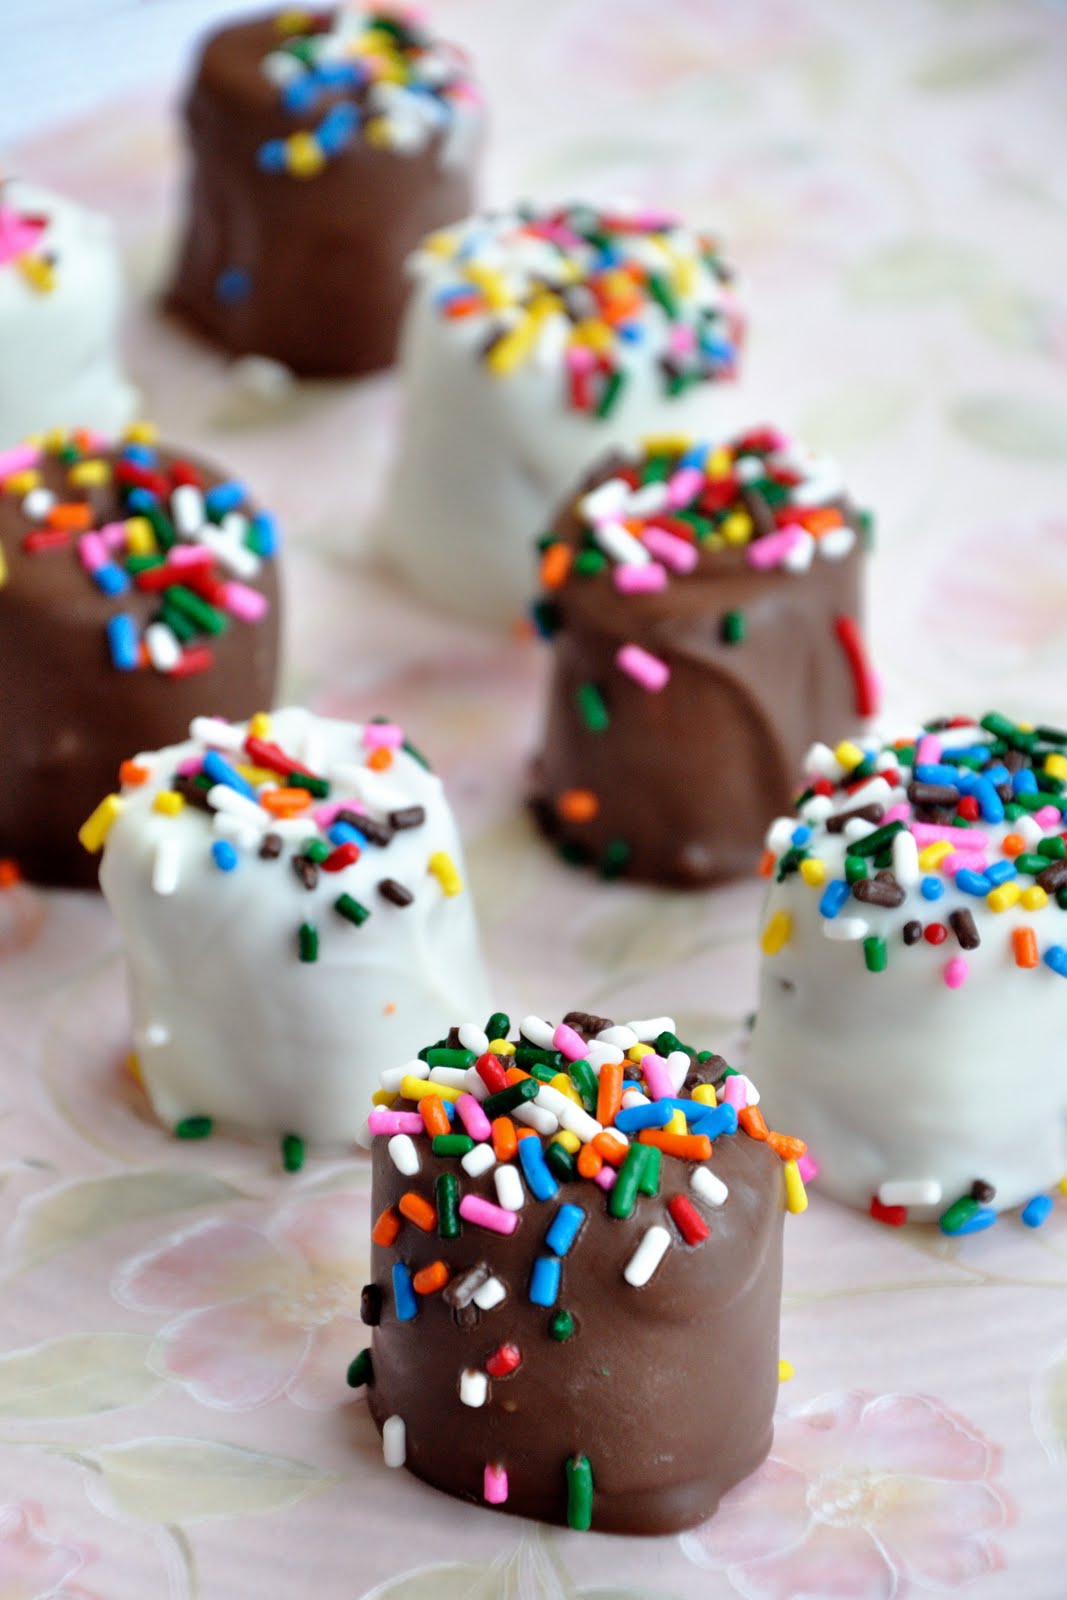 Gluten Free Goodness: Chocolate Covered Marshmallows